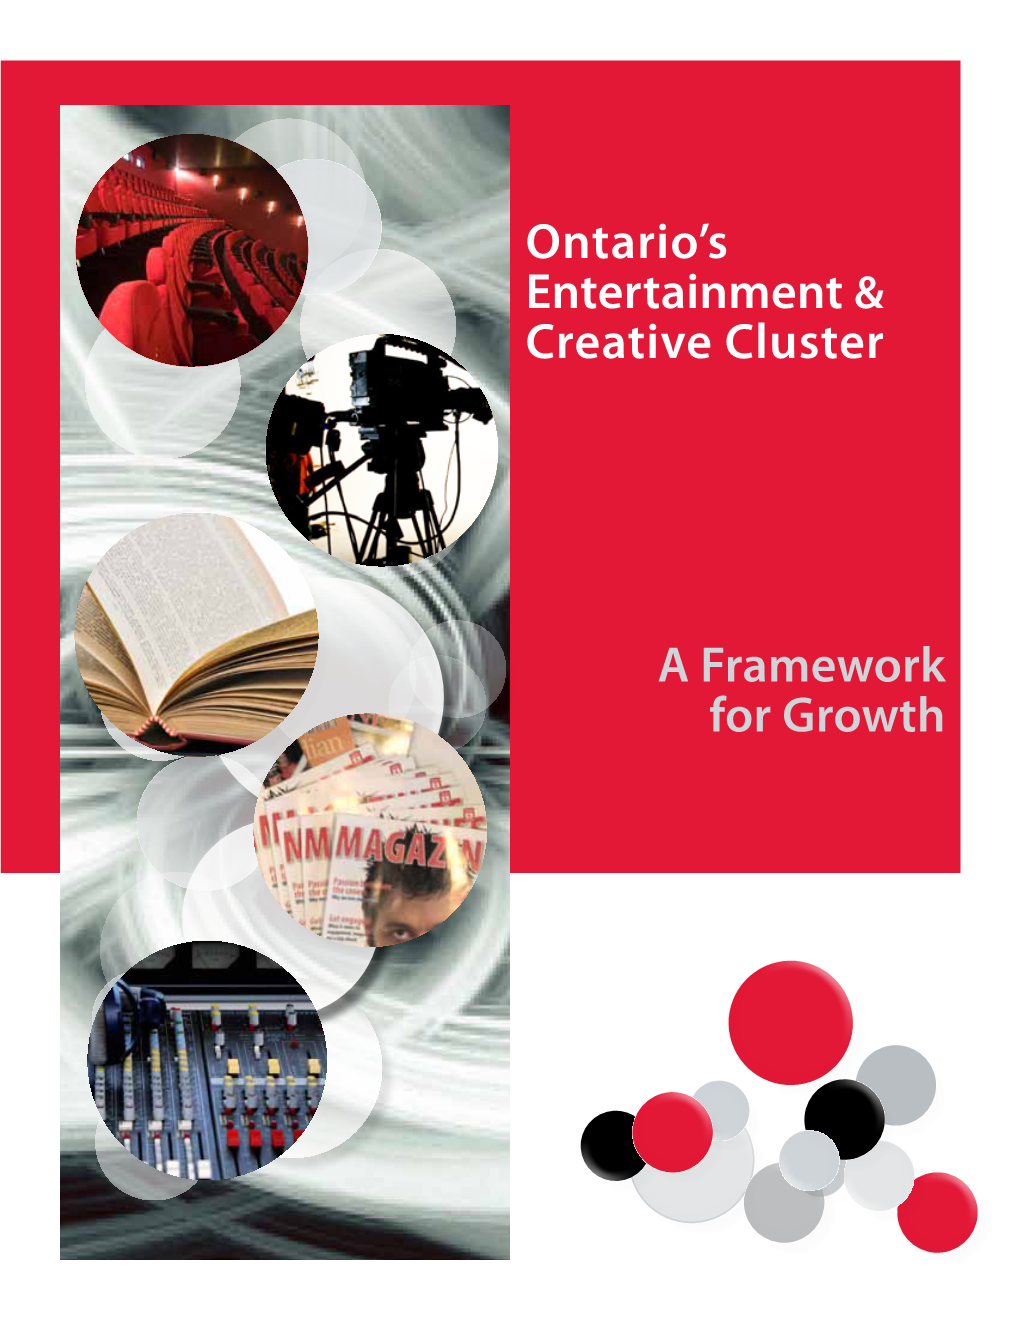 Ontario's Entertainment & Creative Cluster a Framework for Growth